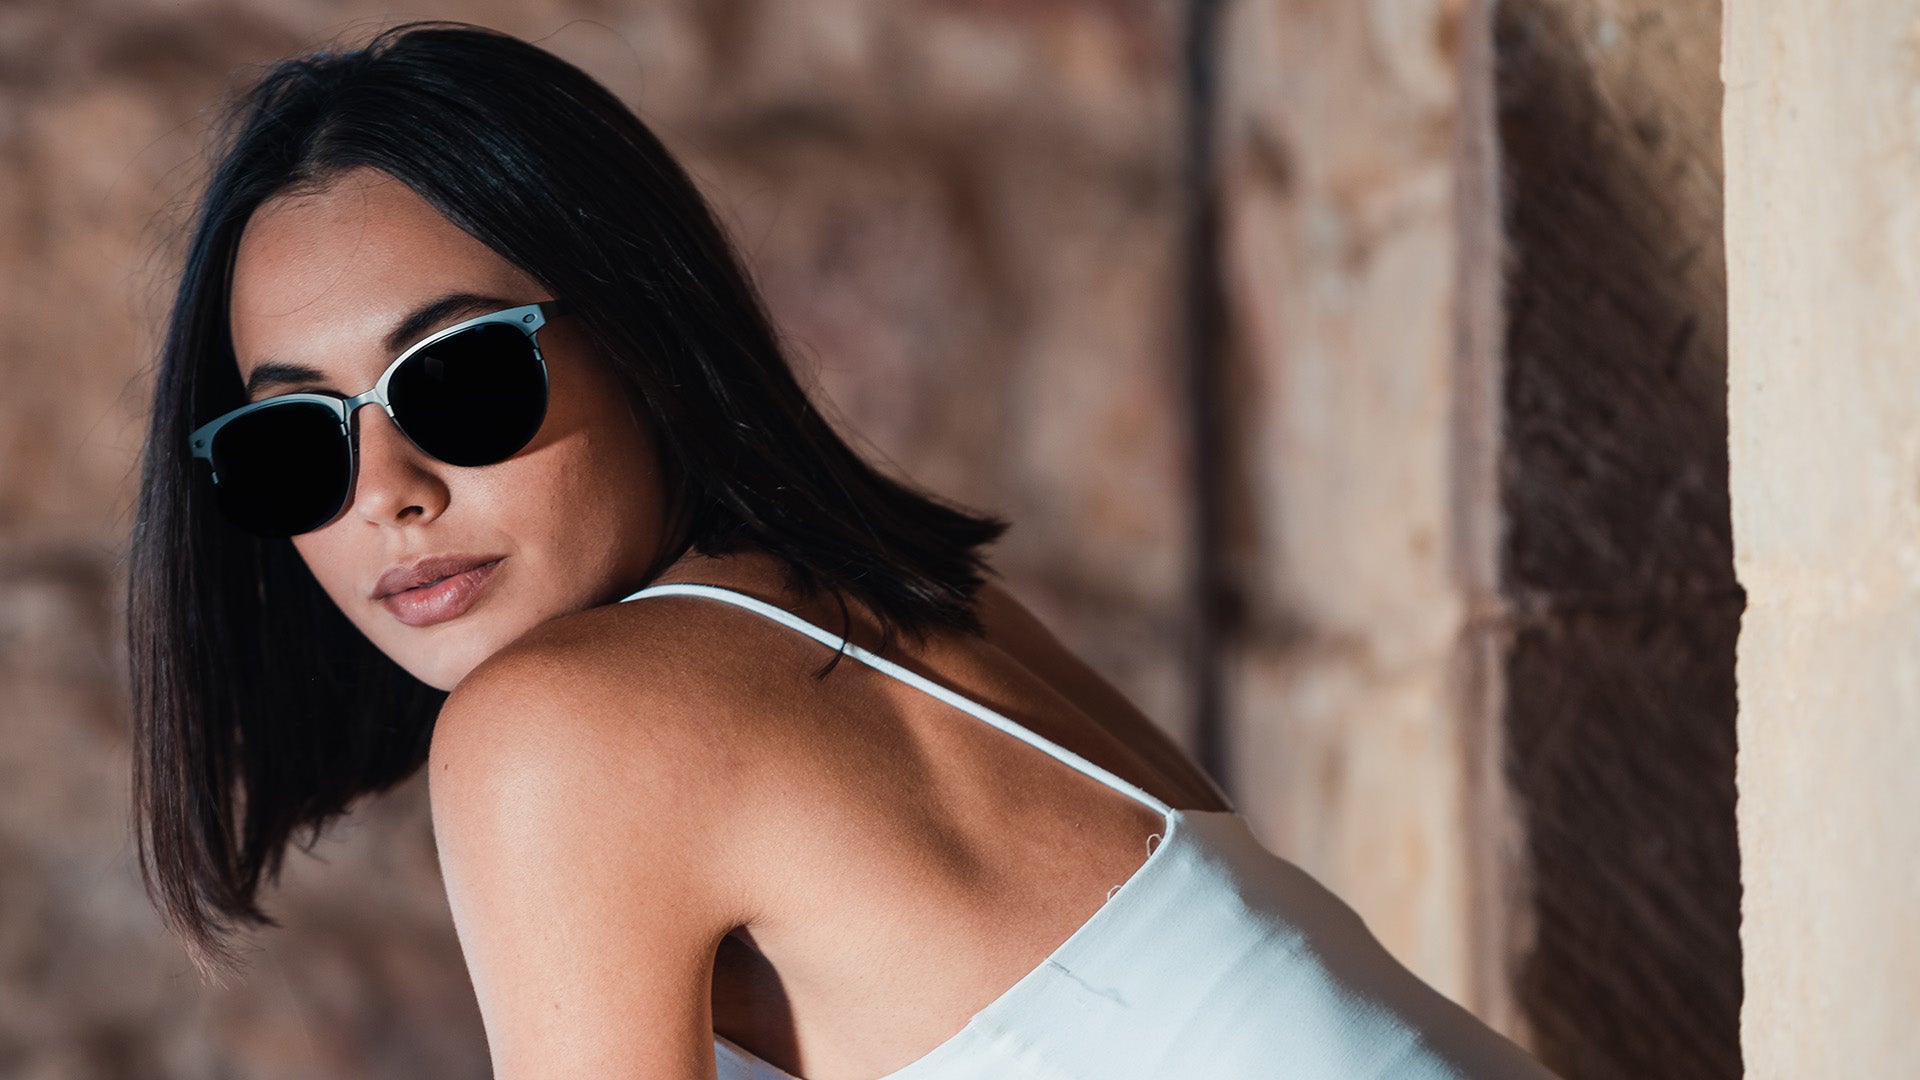 Stylish and fits everyone. Titanium sunglasses is the way to go.